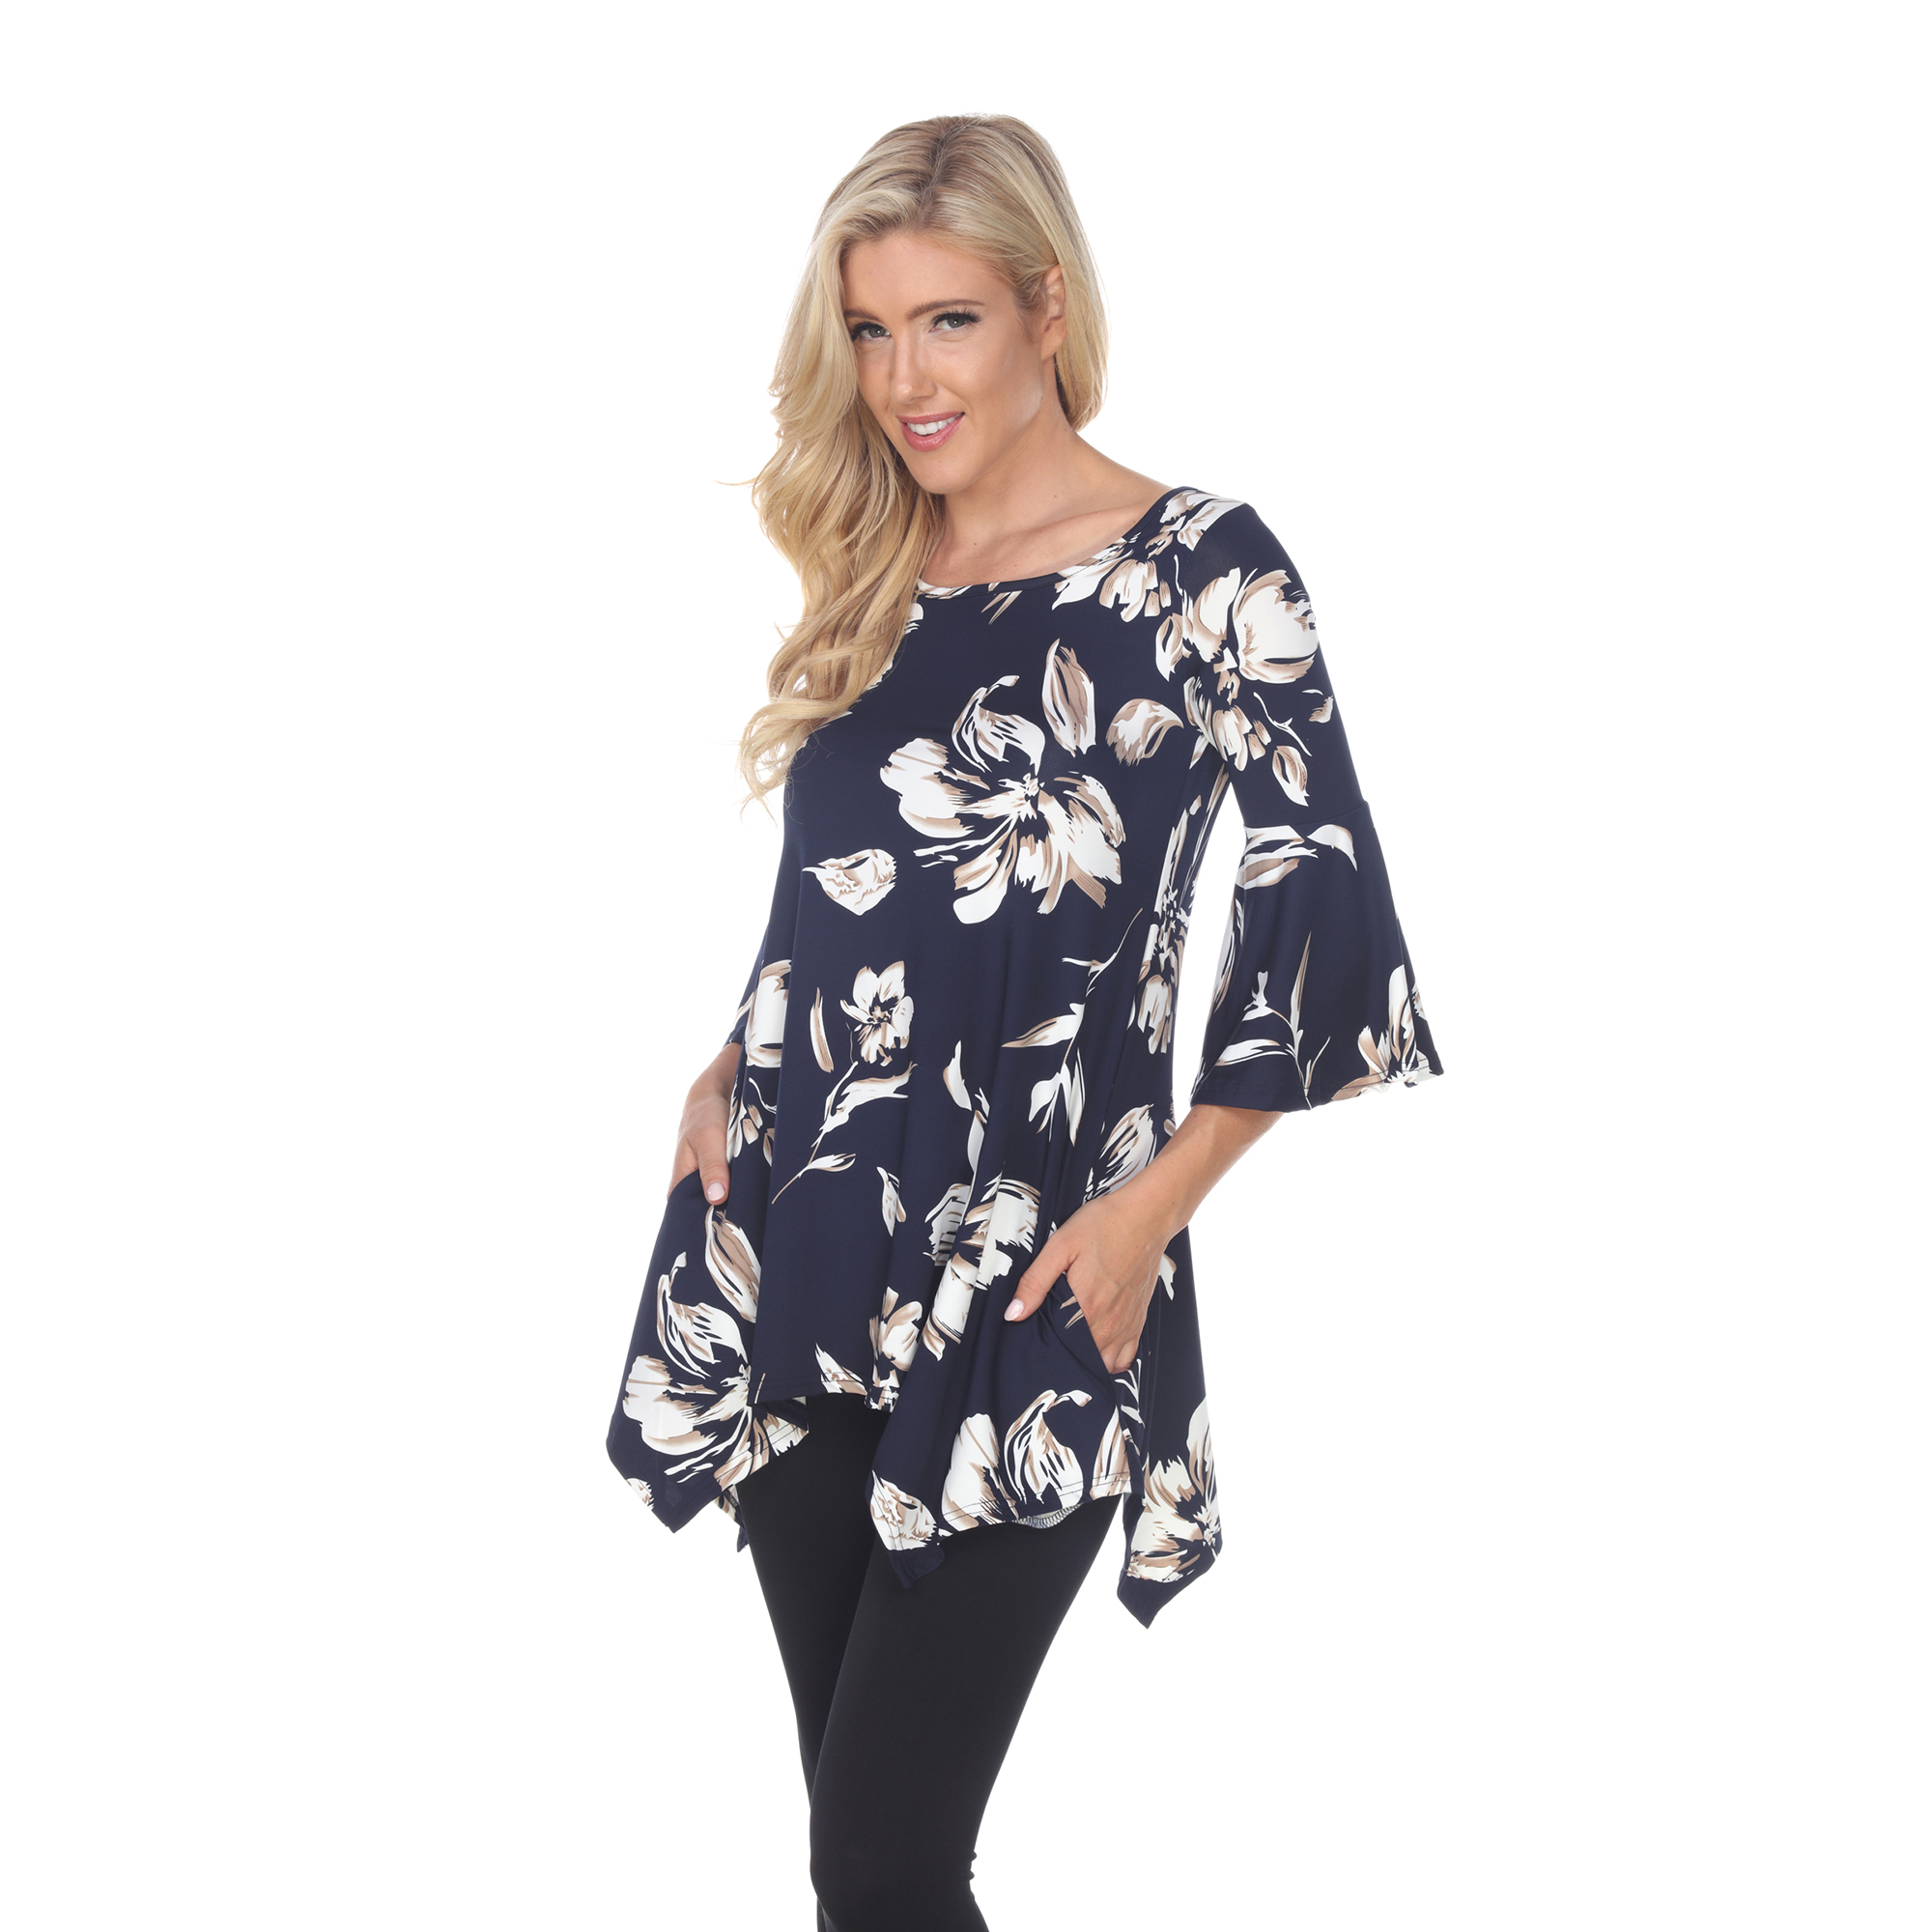 White Mark Women's Floral Print Quarter Sleeve Tunic Top With Pockets - Black, Small